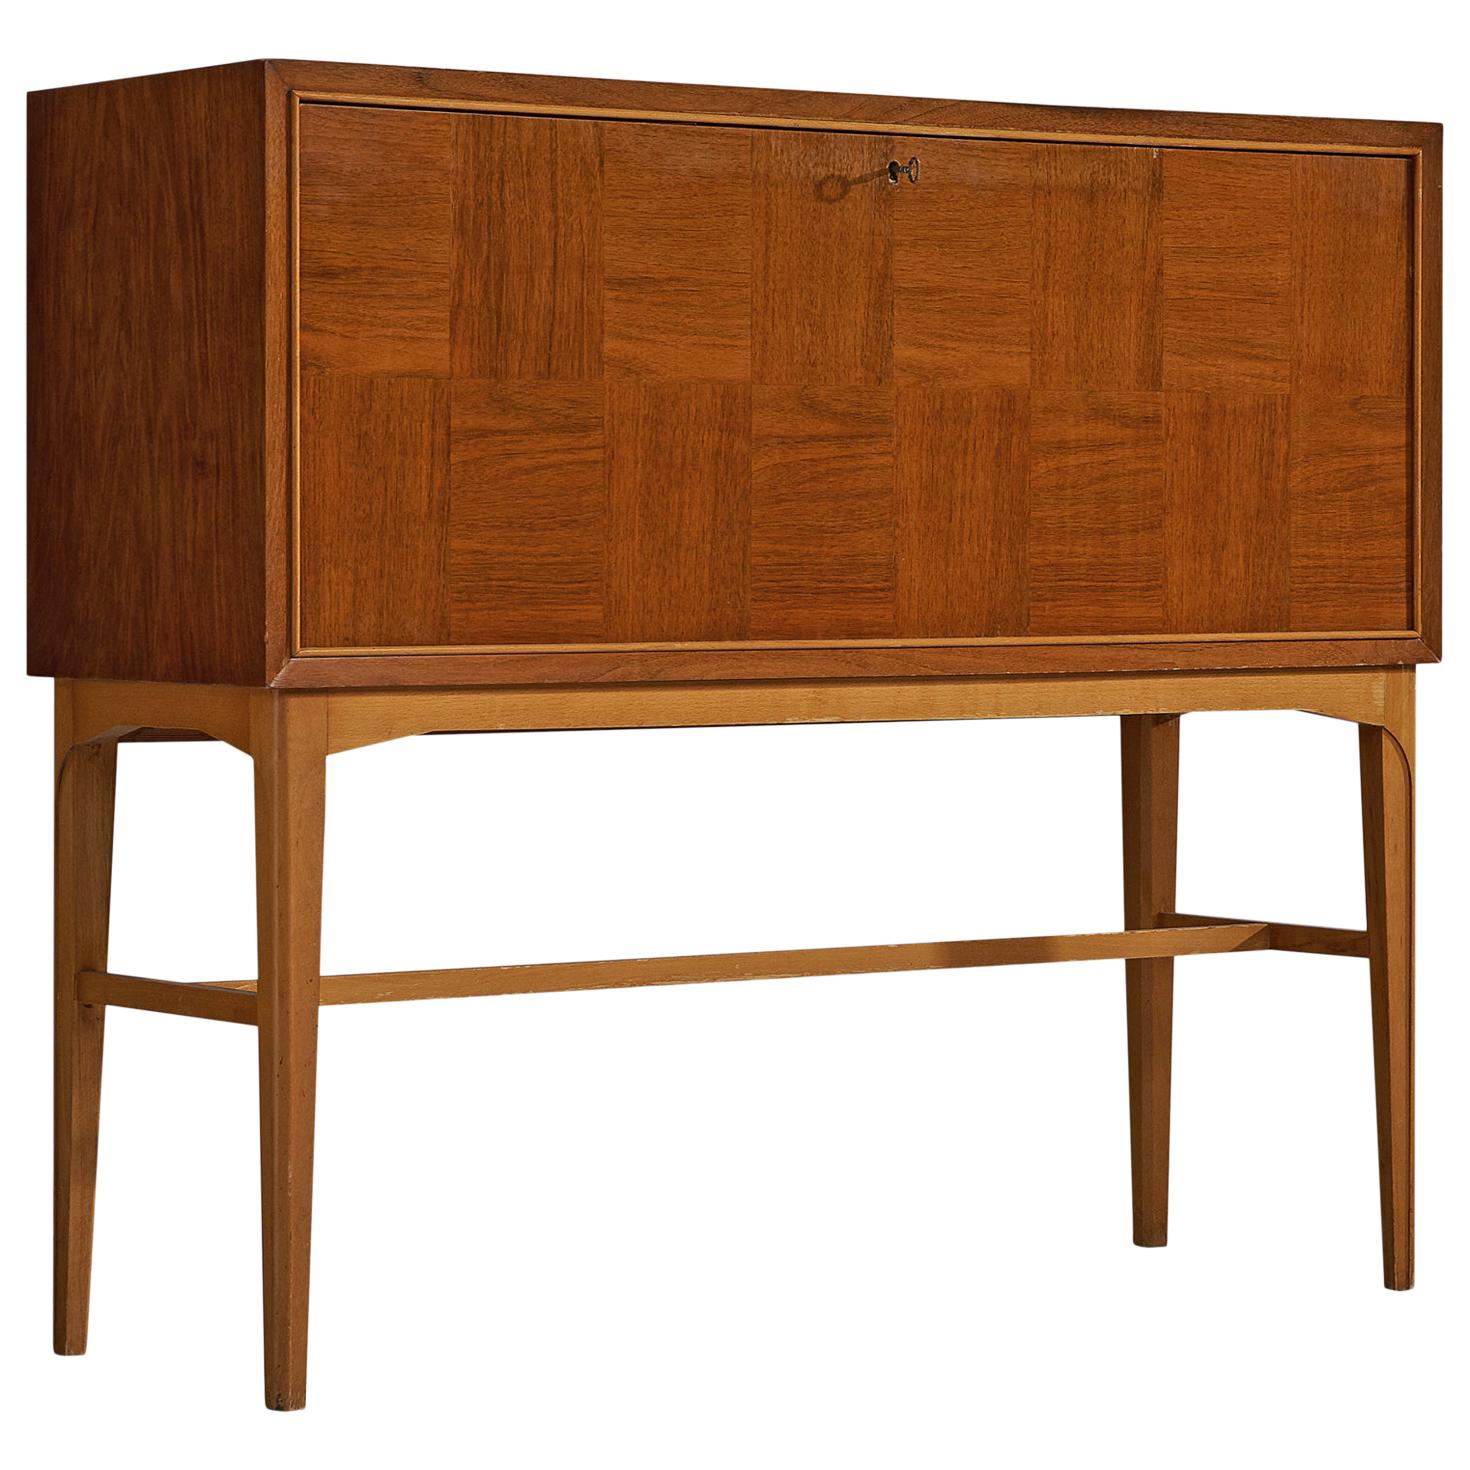 Carl-Axel Acking Cabinet in Teak with Illuminated Dry Bar